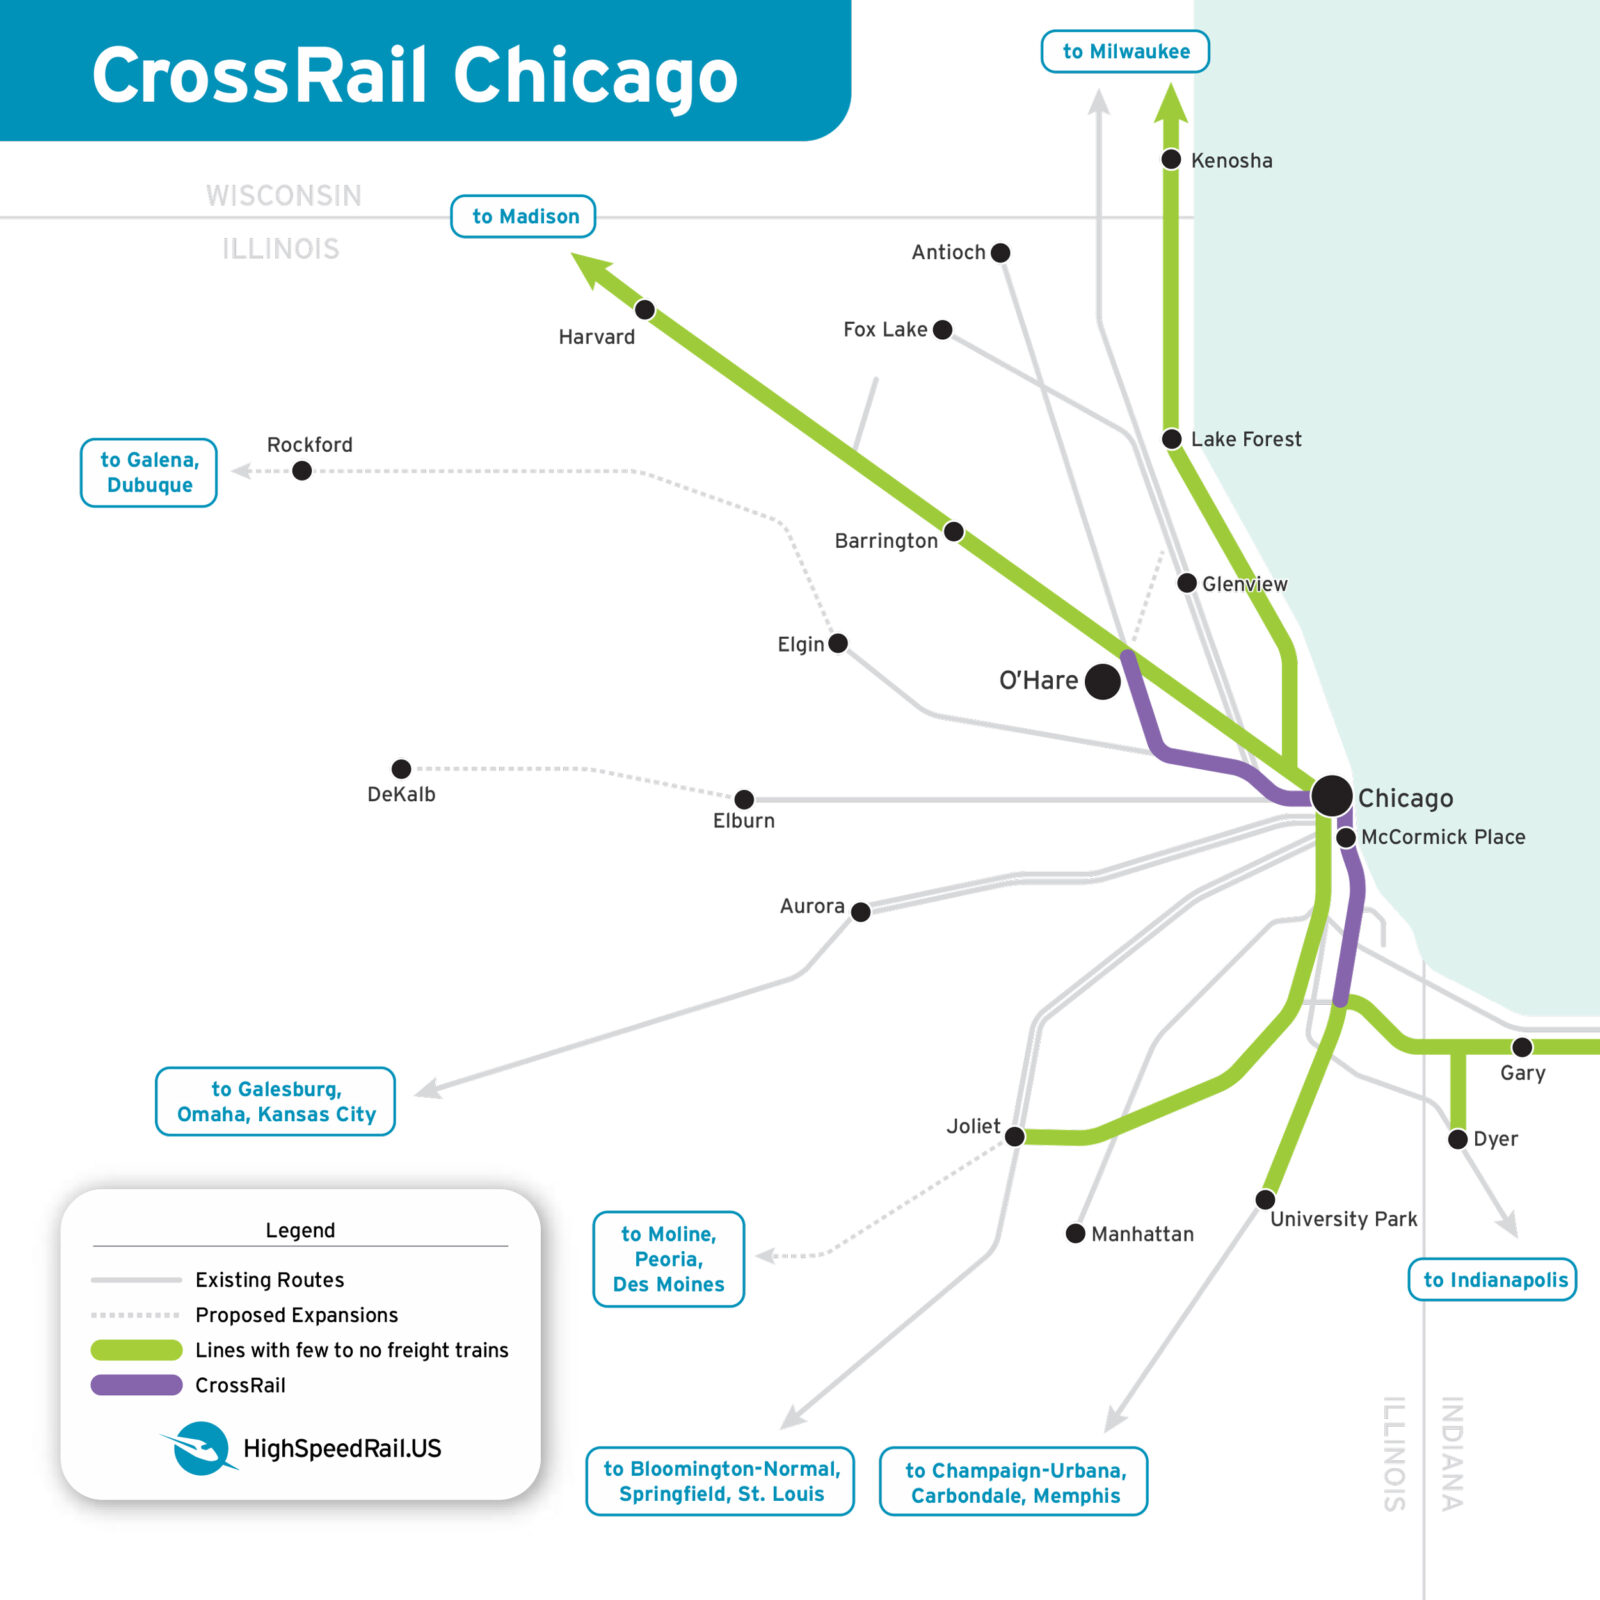 A map showing the existing Amtrka and Metra routes into Chicago.  Four routes with little freight traffic are highlighted in green.  CrossRail Chicago is highlighted in pink.